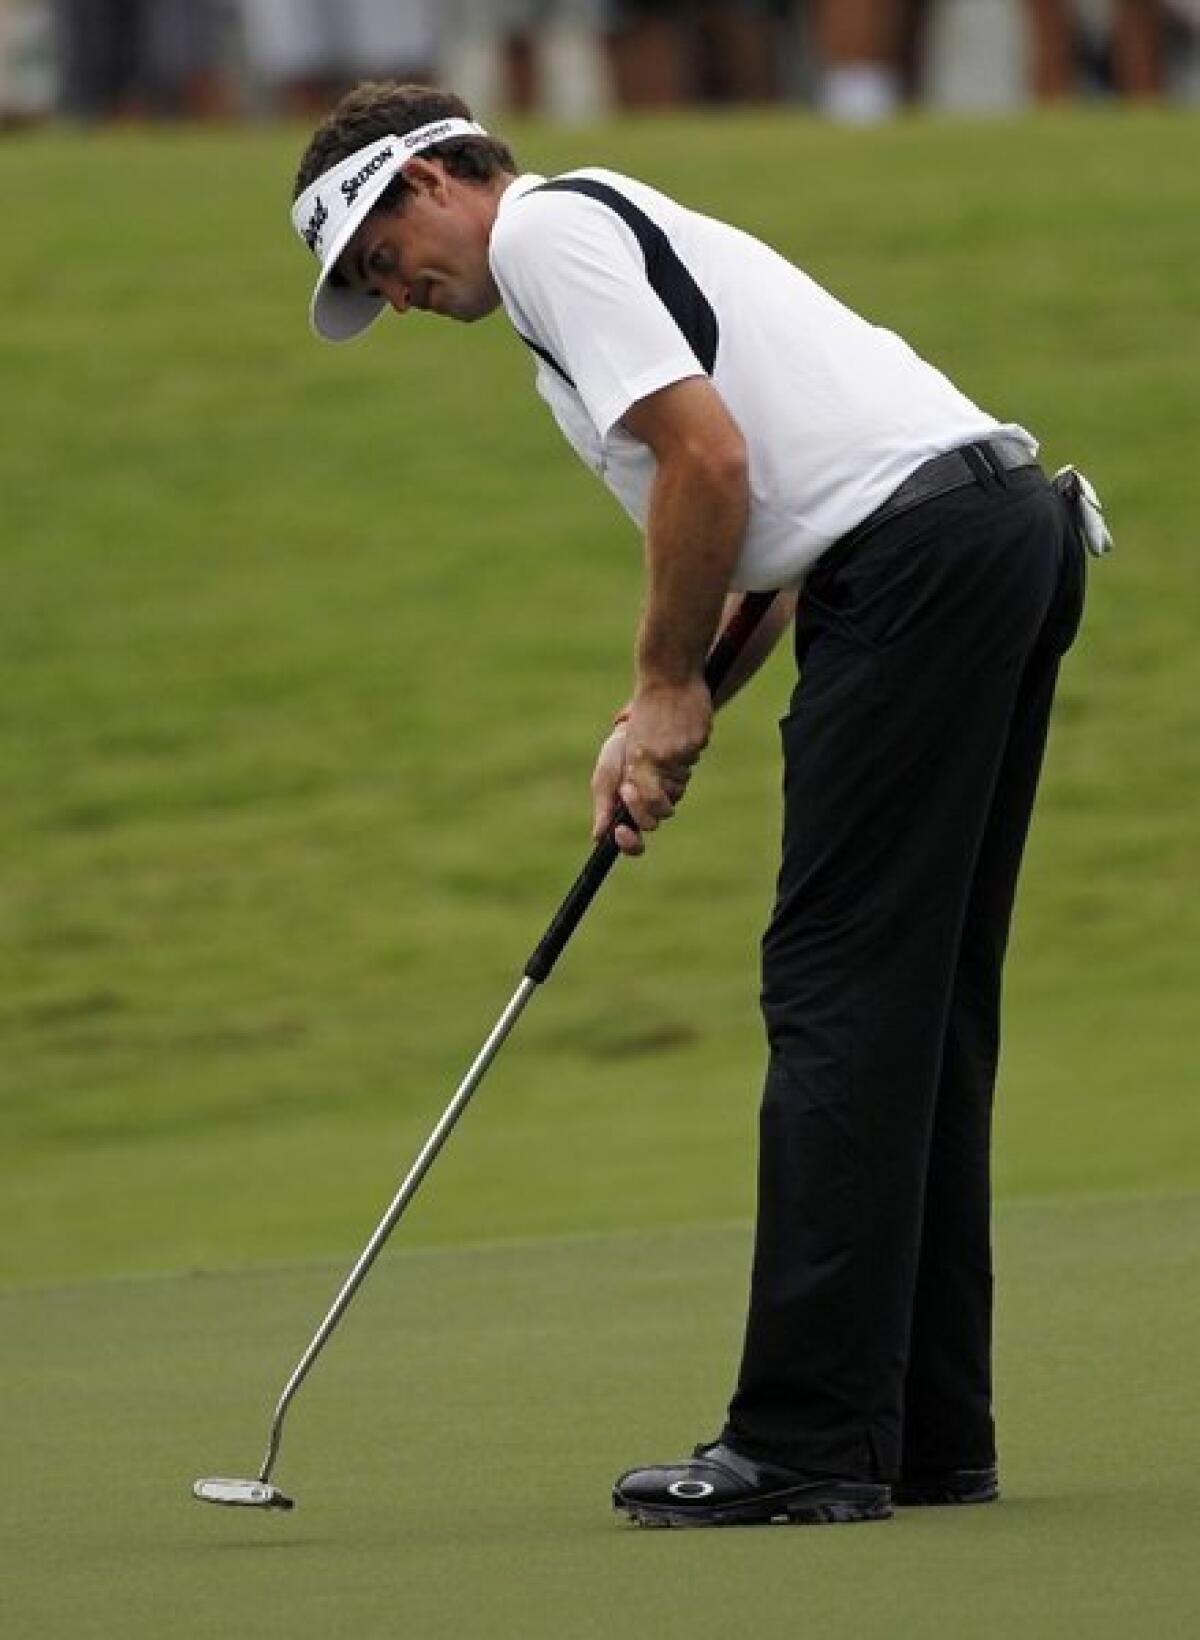 Belly putters, like this one used by Keegan Bradley, could be banned soon.